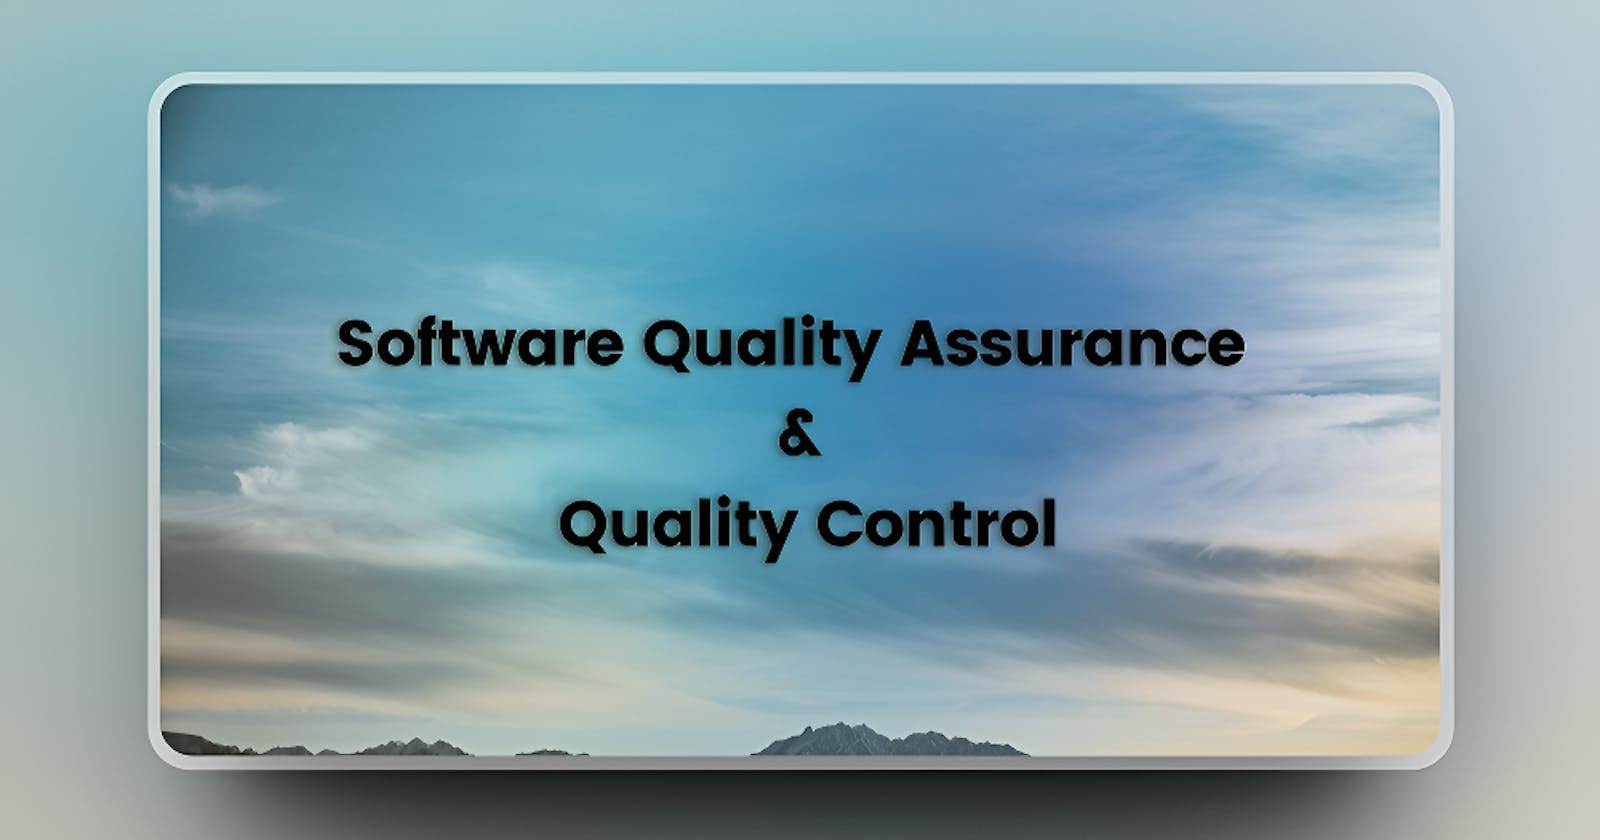 Software Quality Assurance and Quality Control